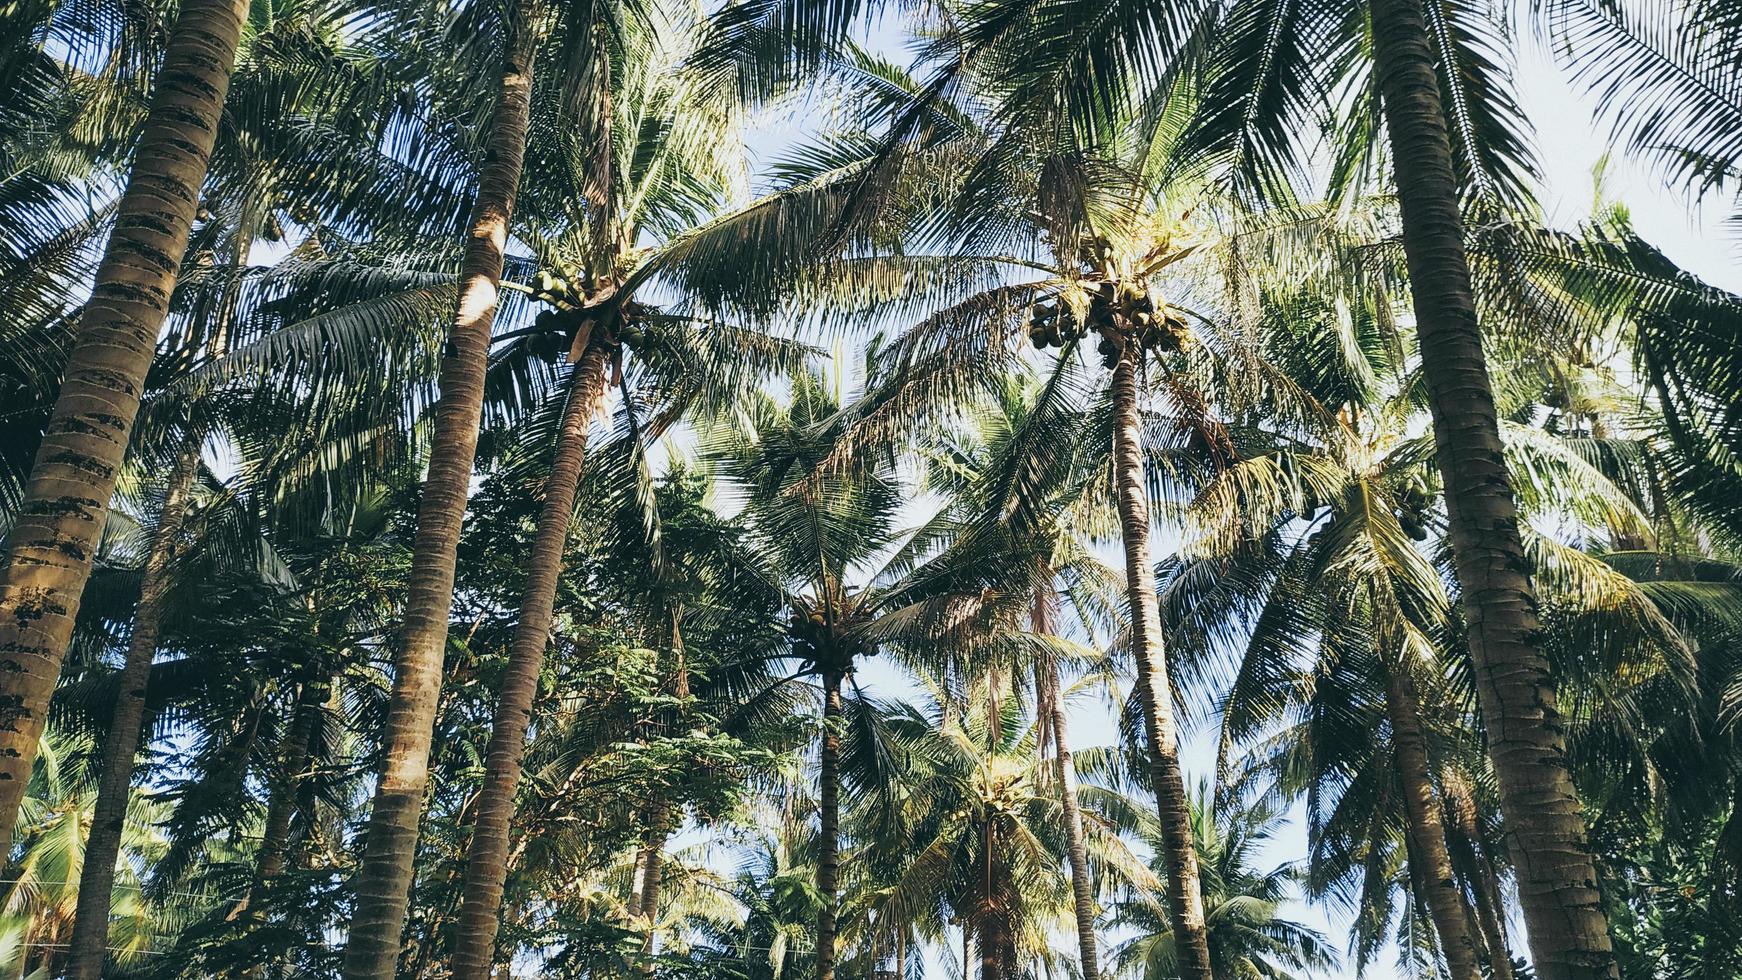 Coconut trees on an Island, Philippines  photo